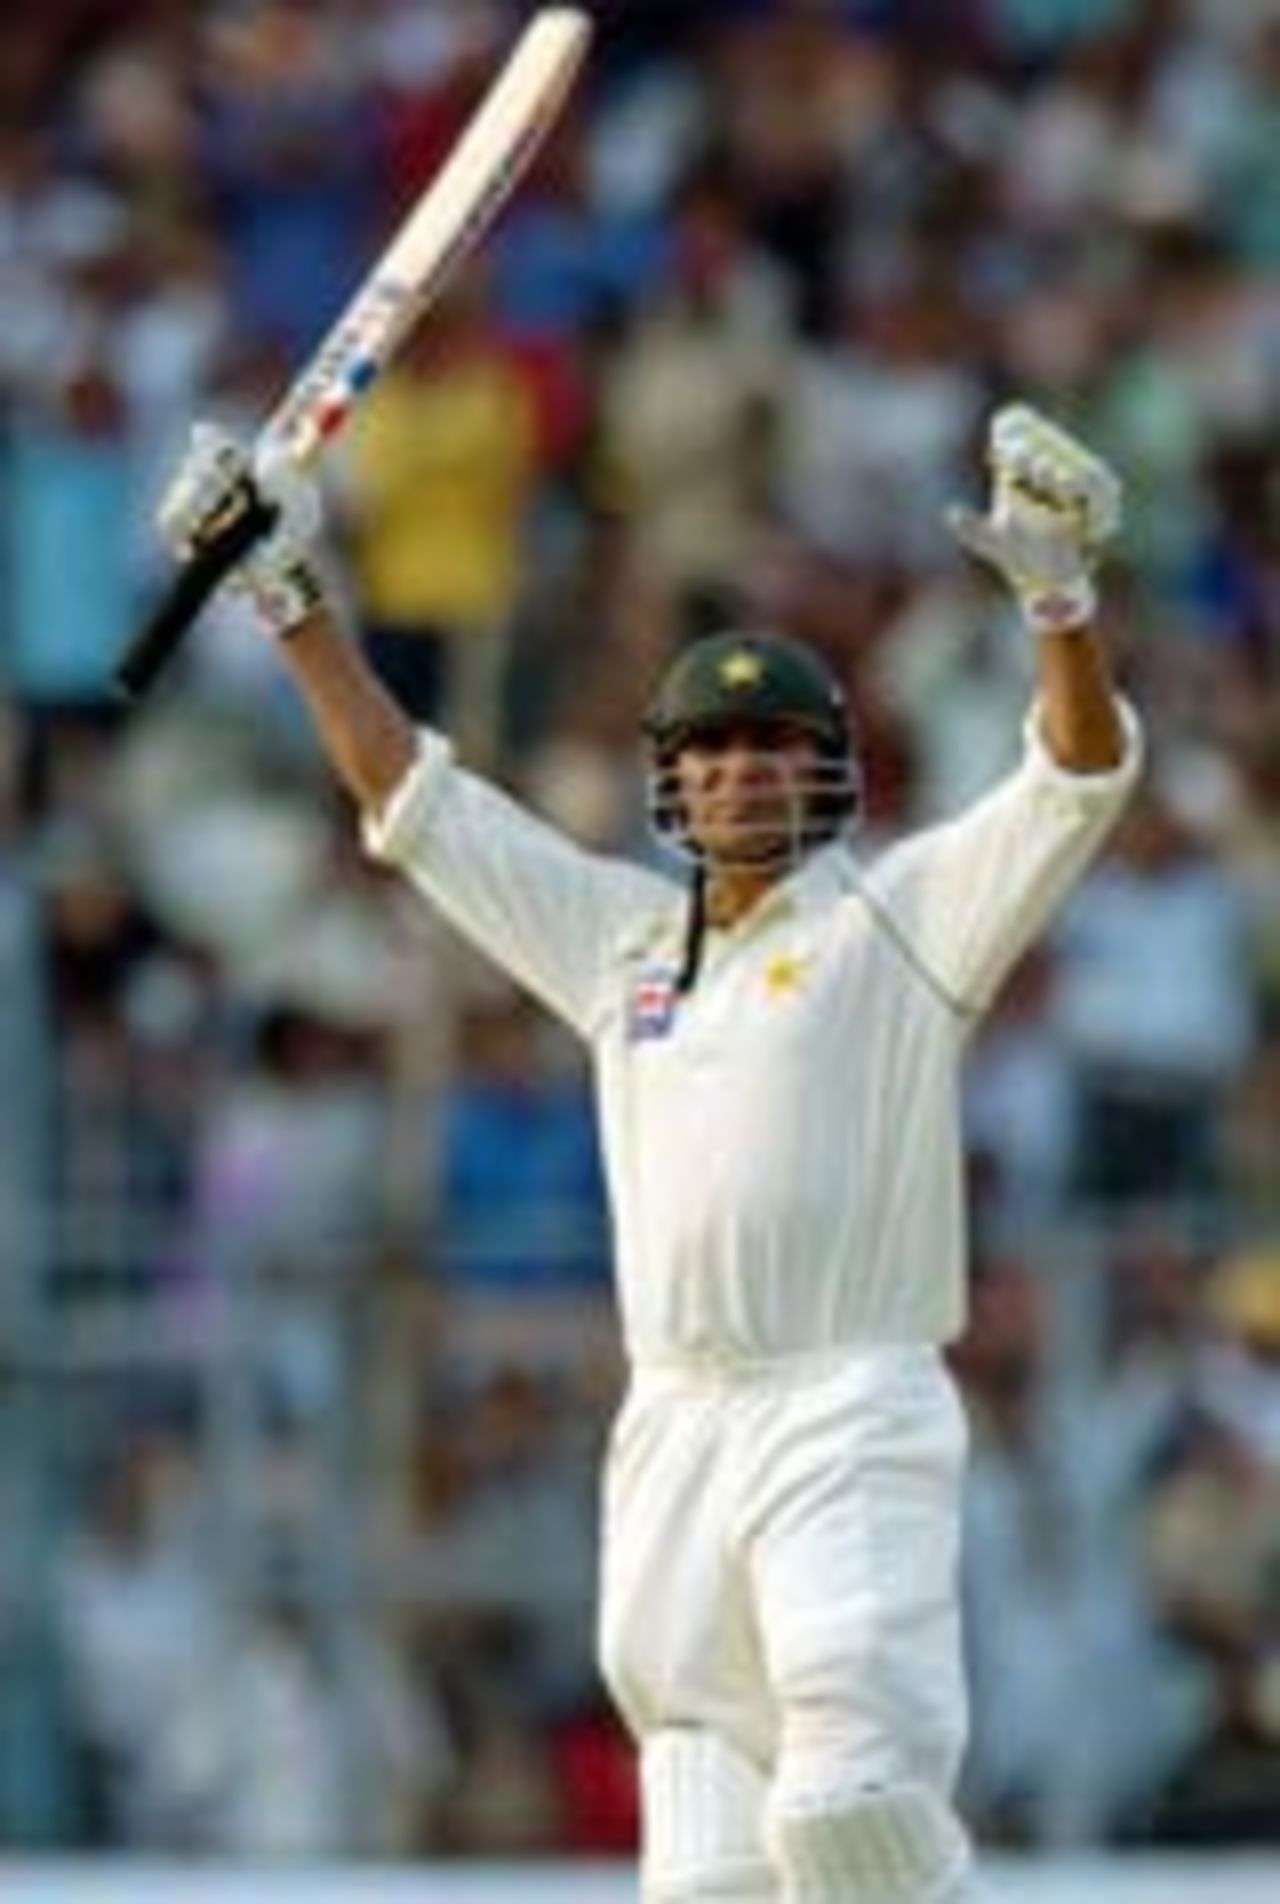 Younis Khan acknowledges the crowd after getting his century, India v Pakistan, 2nd Test, Kolkata, March 17, 2005